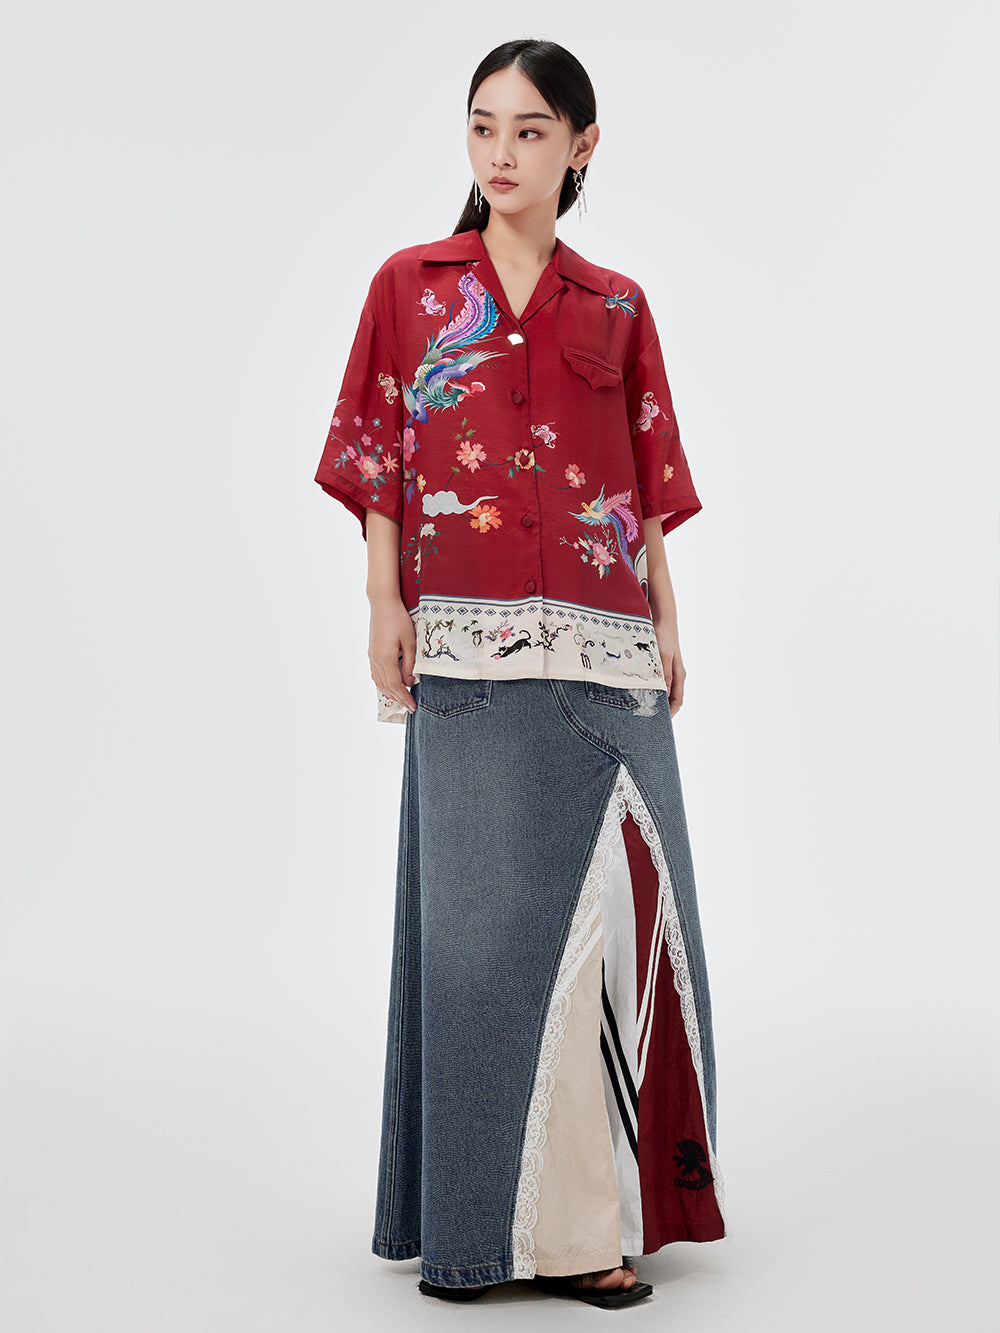 MUKZIN Embroidered Mid-Sleeve Shirt